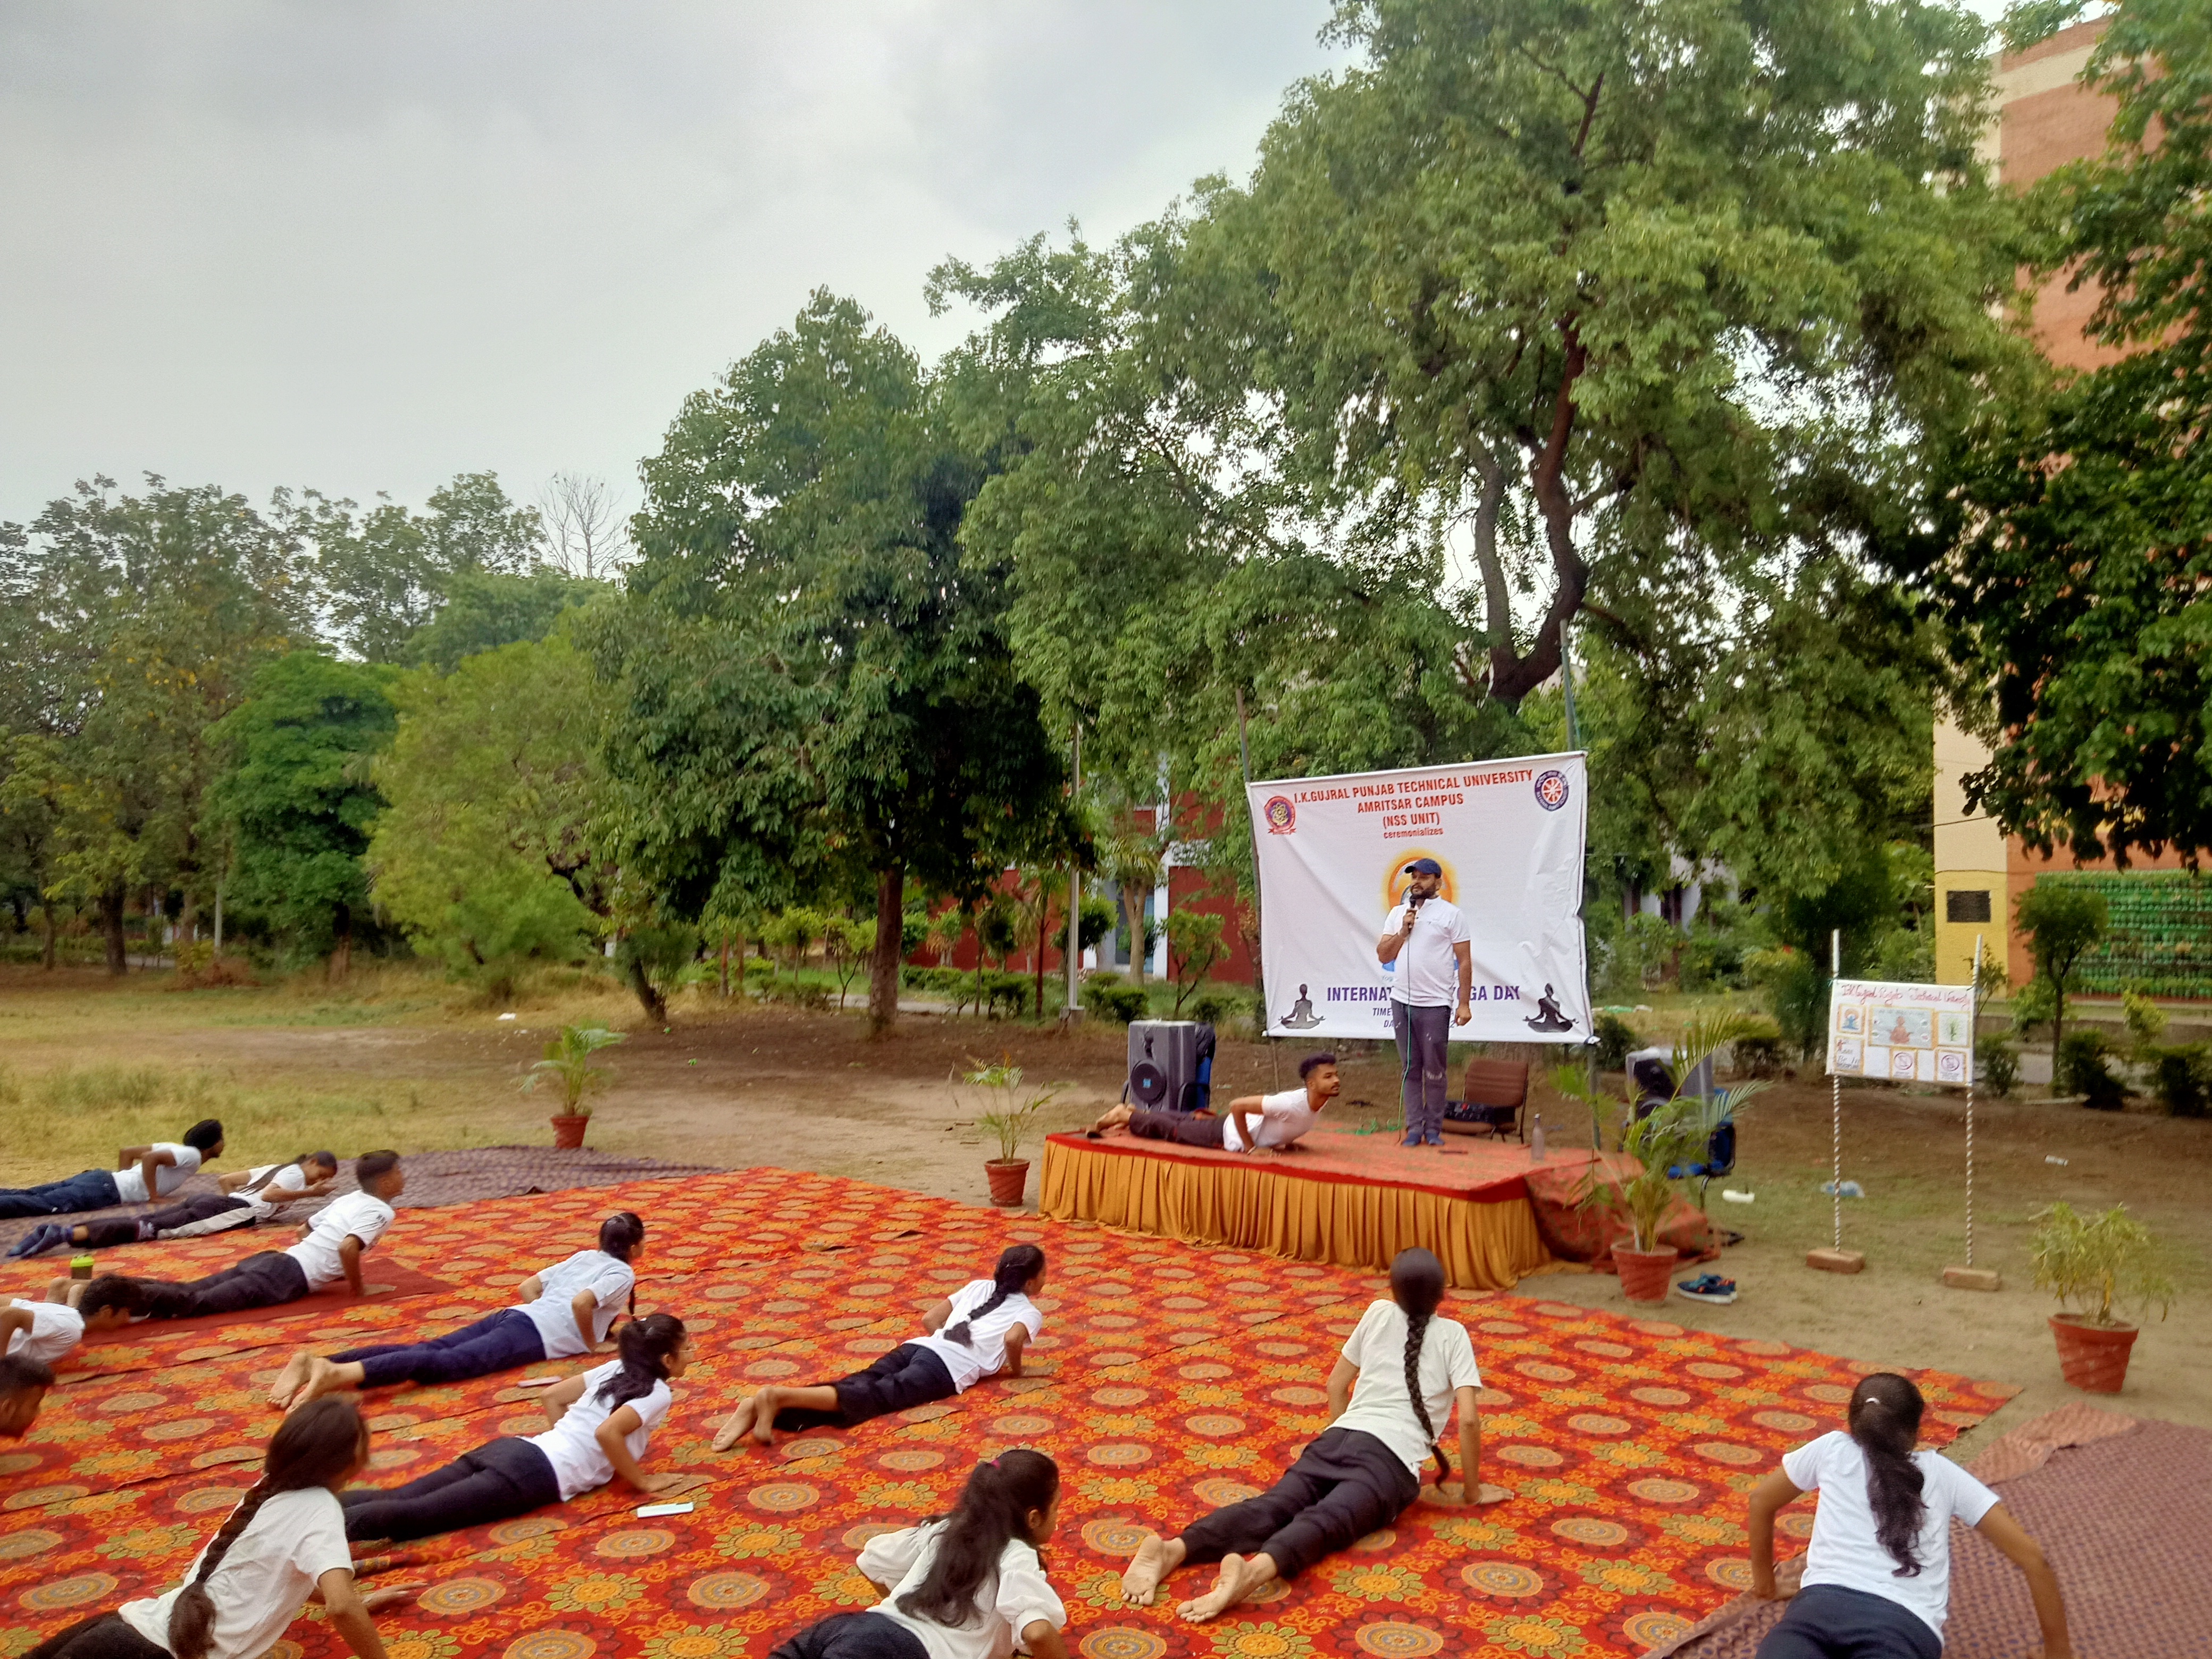 8th International Yoga Day was celebrated and organized by NSS Unit at IKGPTU Amritsar Campus on 21st June 2022 at Sports Ground from 6:00am onwards